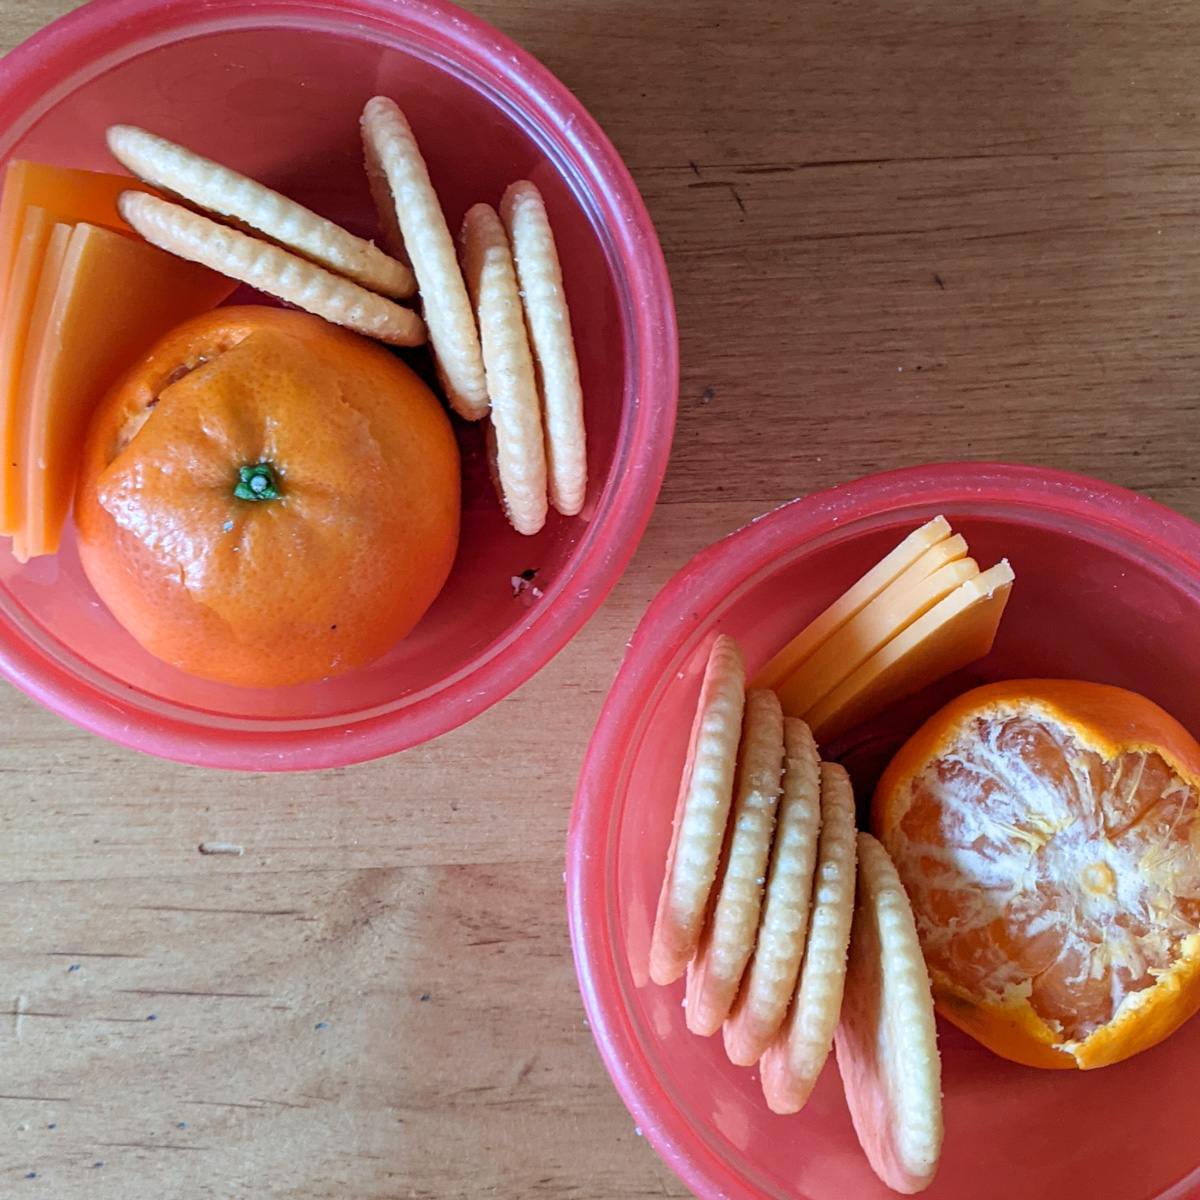 Two kids snacks with little cutie oranges, crackers and slices of cheese.